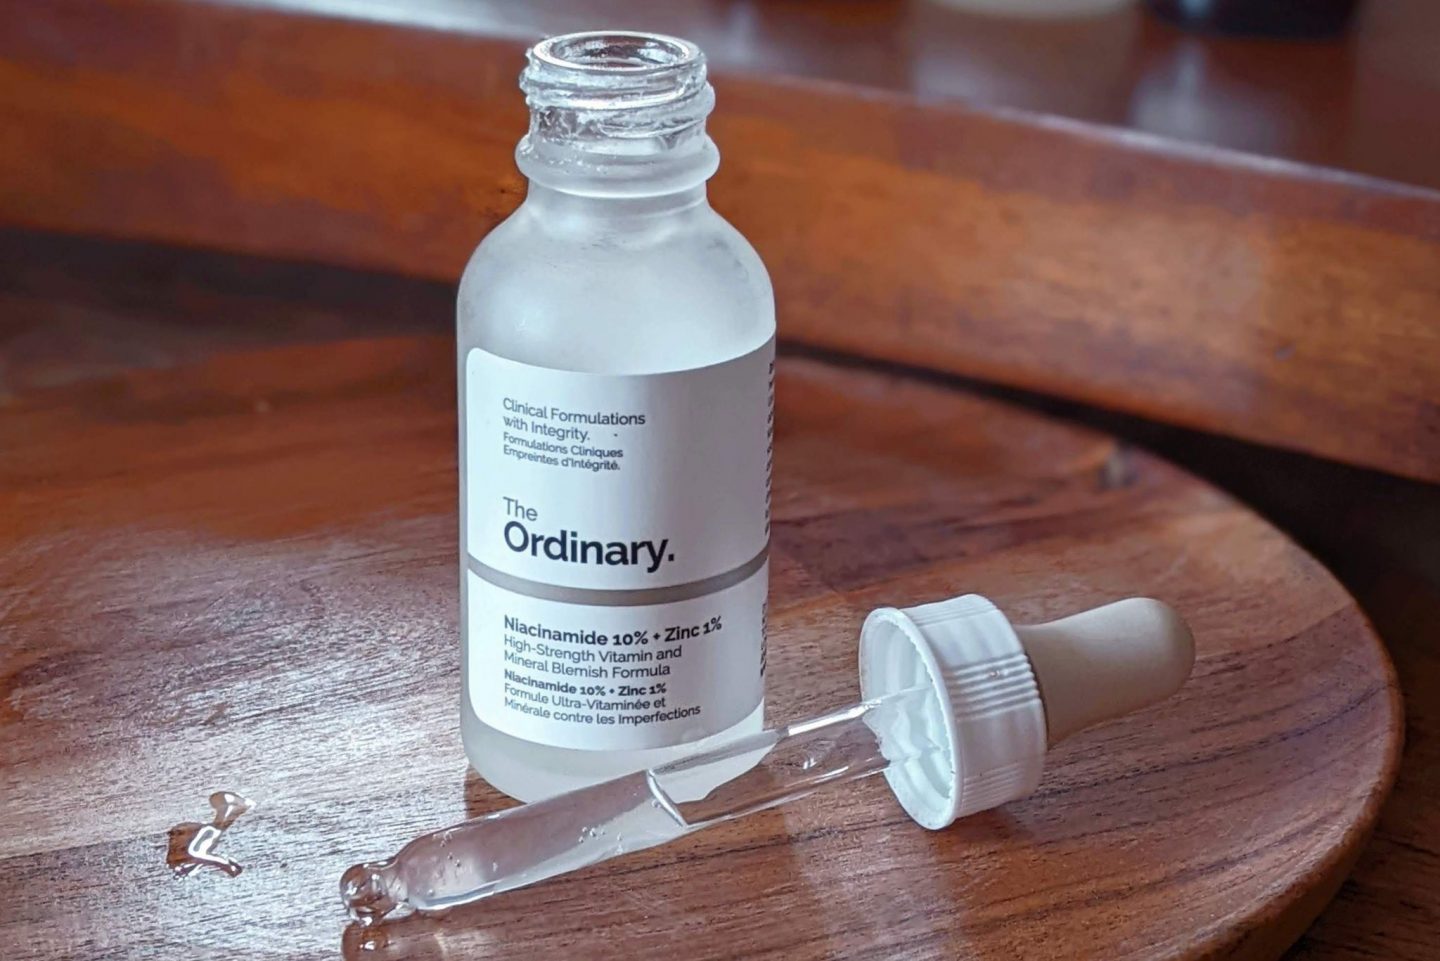 The Ordinary Serums Explained